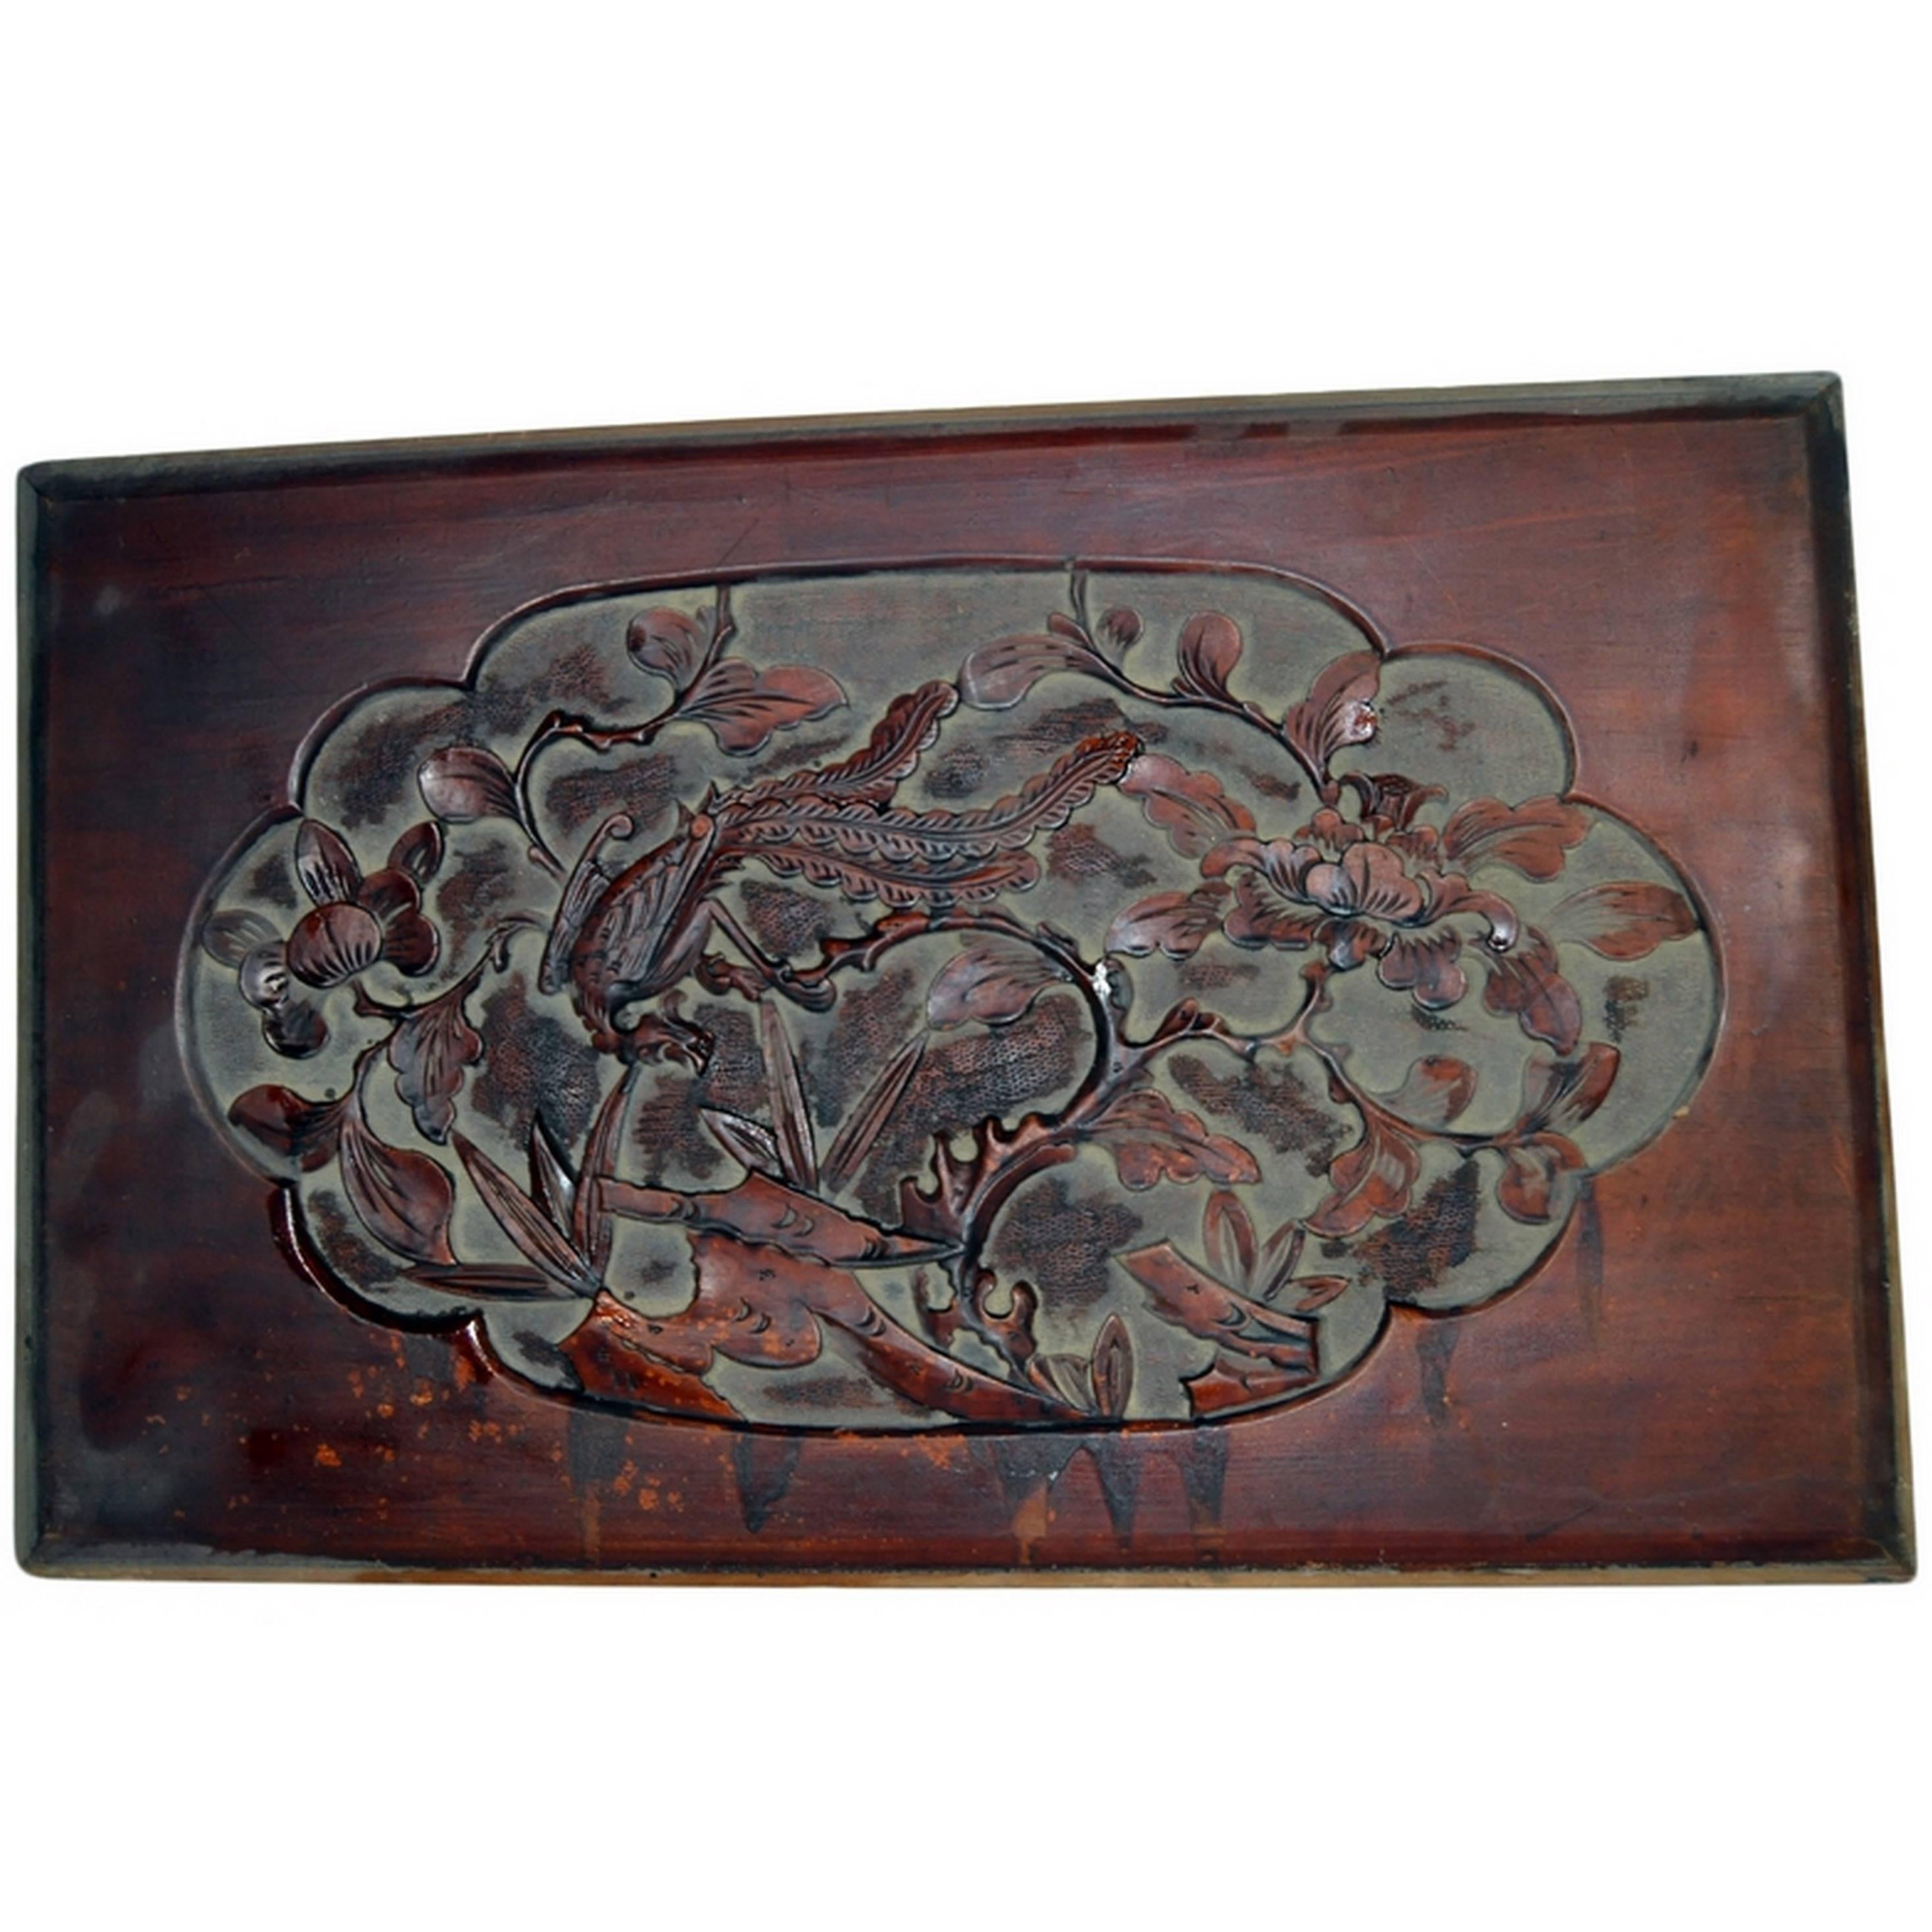 Antique Chinese Hand-Carved Rosewood Lacquered Wooden Wall Plaque